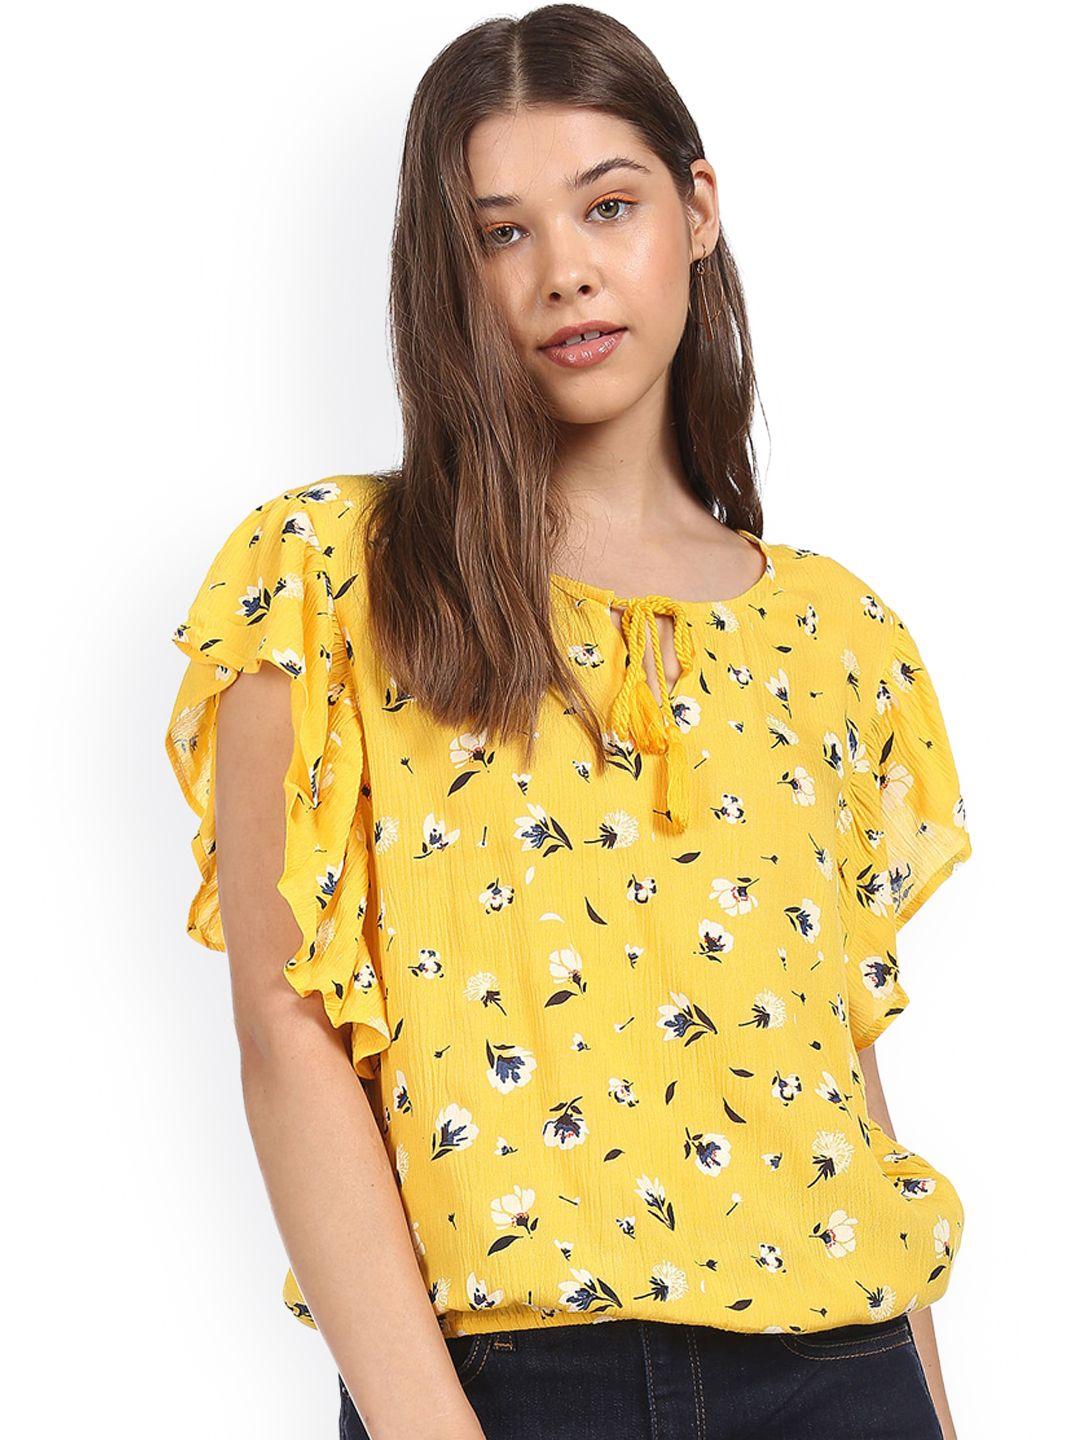 sugr-yellow-flutter-sleeves-printed-top